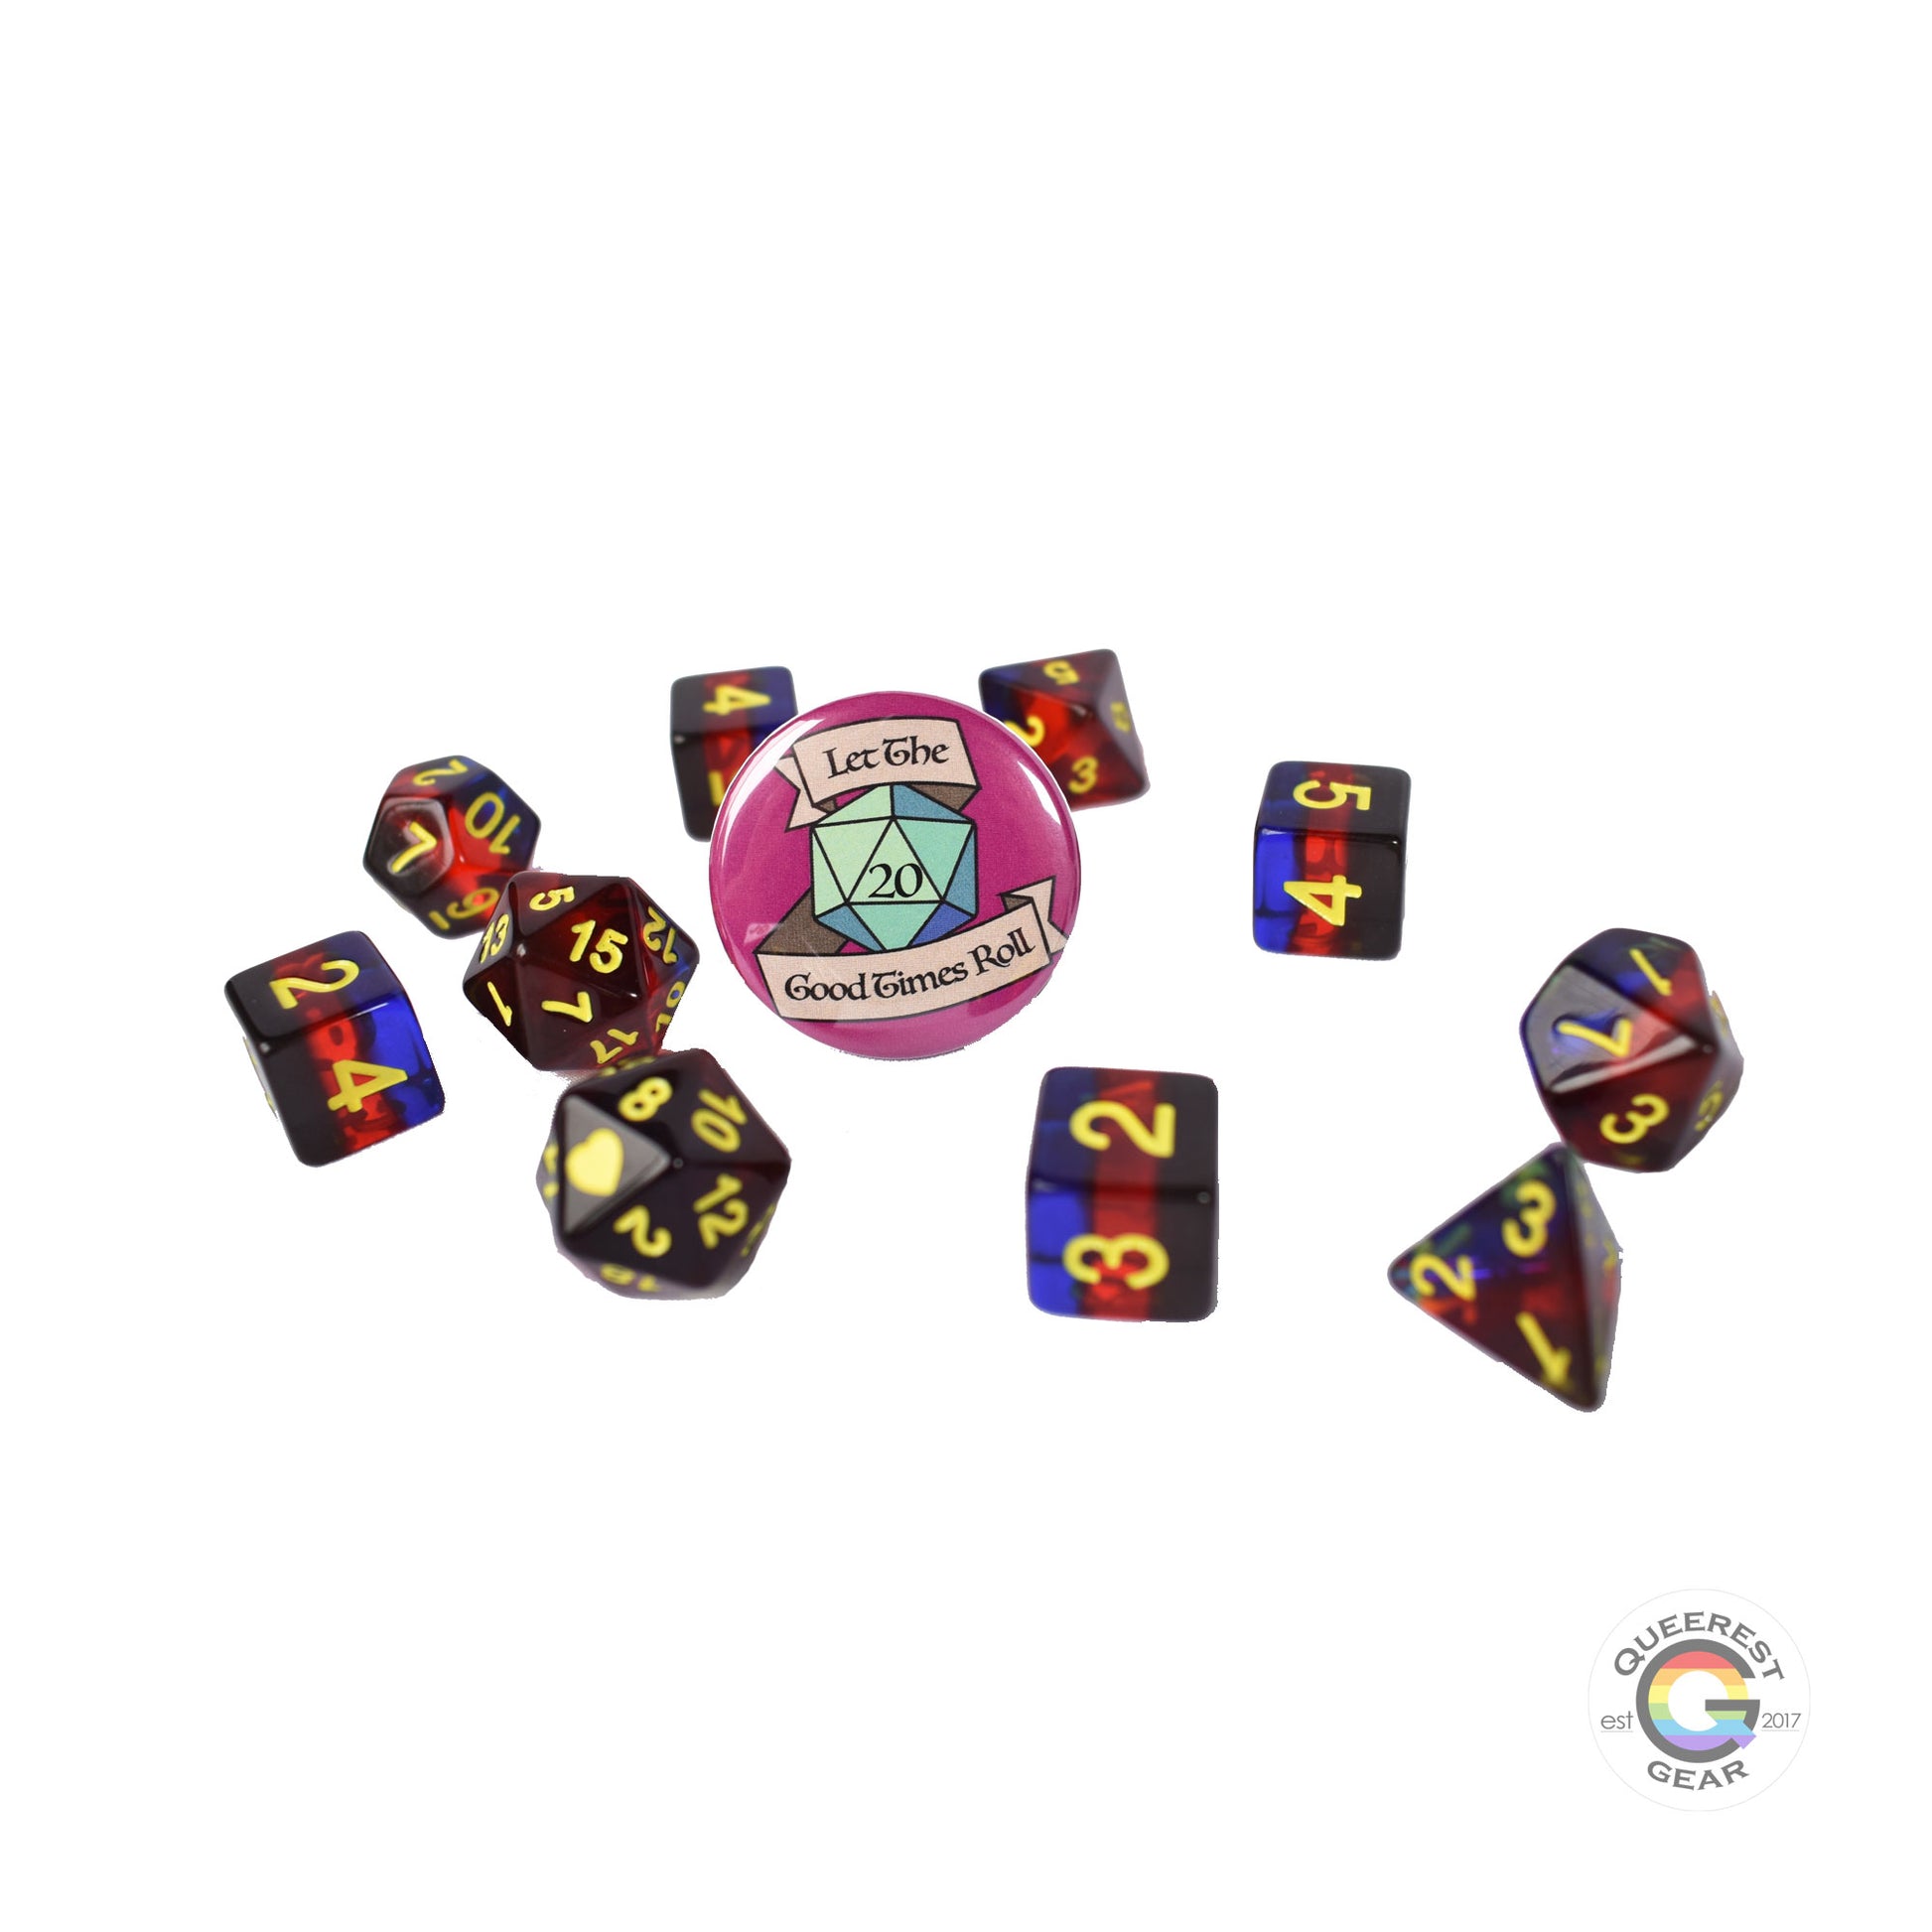 11 piece set of polyhedral dice scattered on a white background. They are transparent and colored in the stripes of the polyamory flag with yellow ink. There is the freebie “let the good times roll” pinback button among them